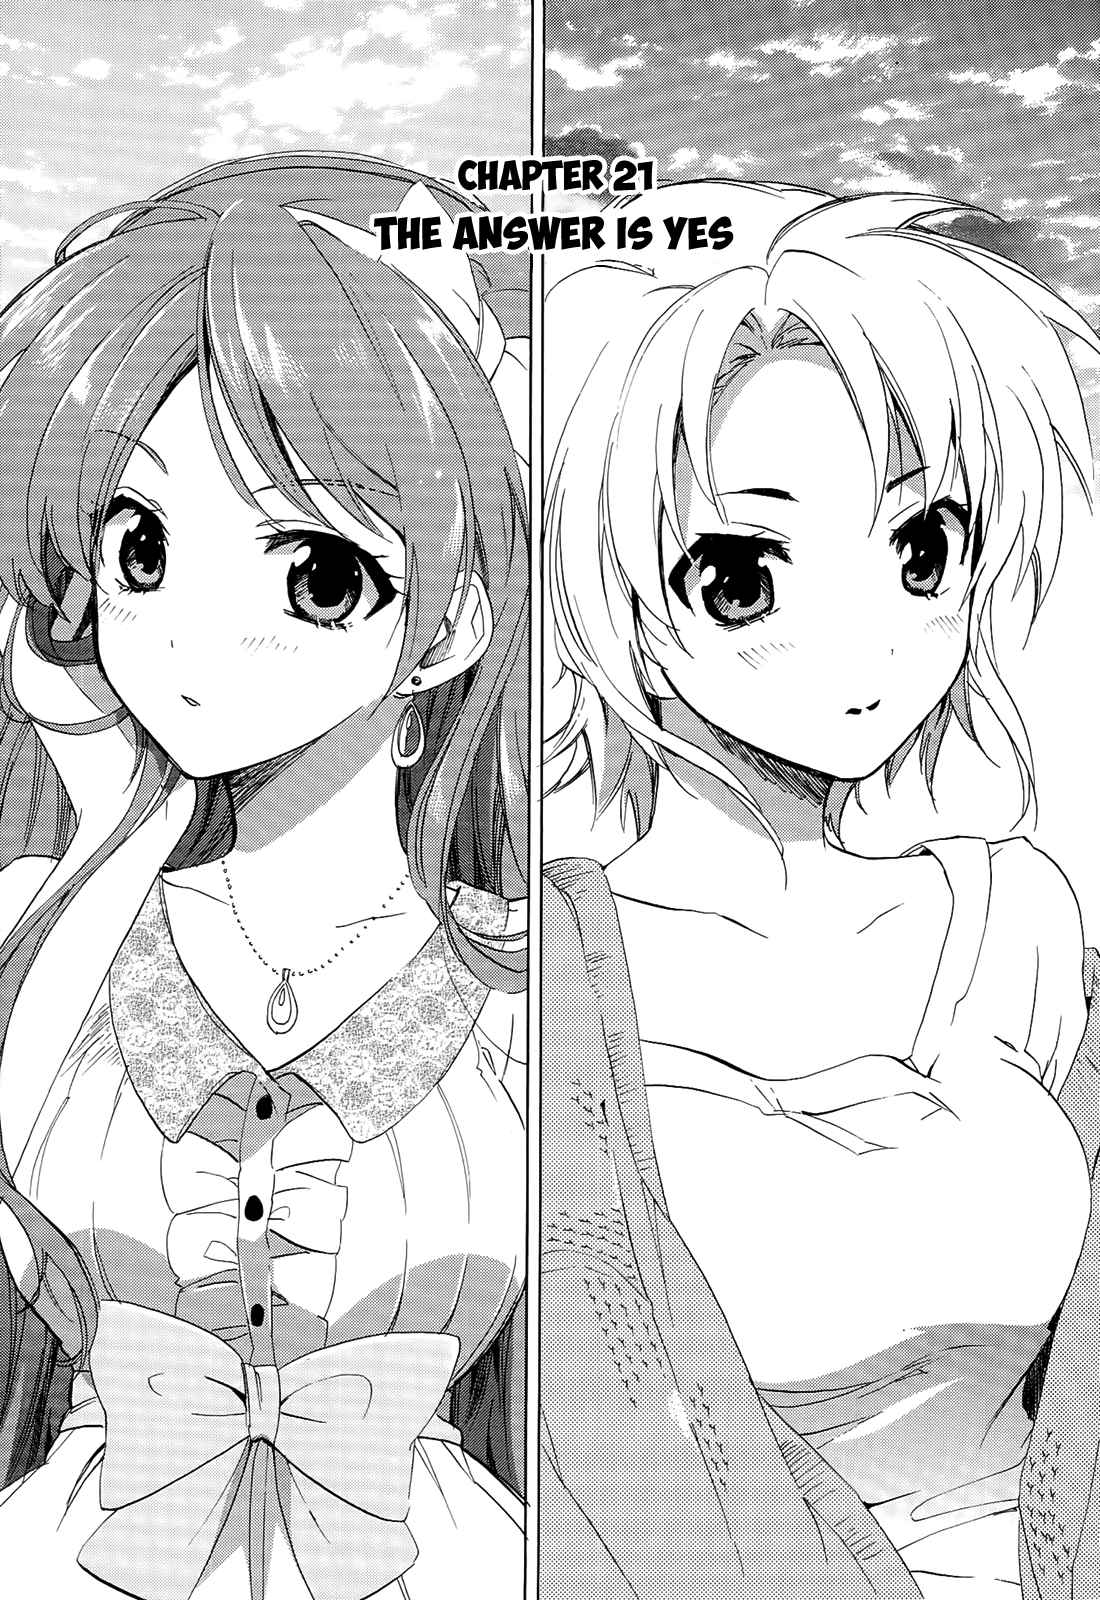 Golden Time Vol. 4 Ch. 21 The Answer is YES